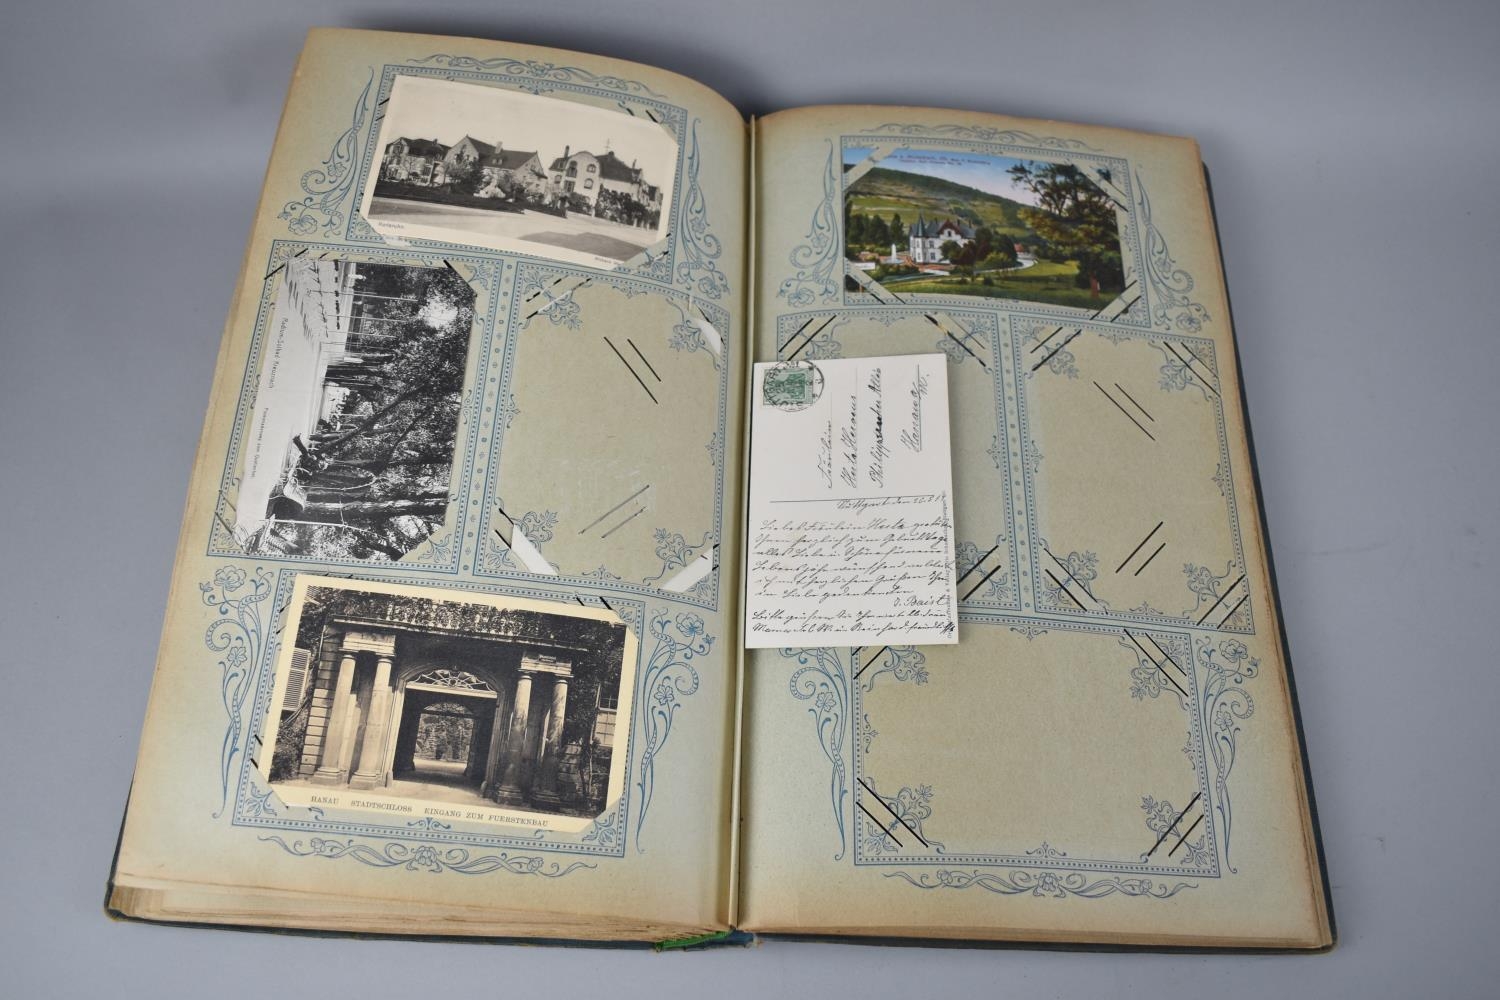 A Large Edwardian German Postcard Album Containing Large Quantity of Coloured and Monochrome Mixed - Image 8 of 8